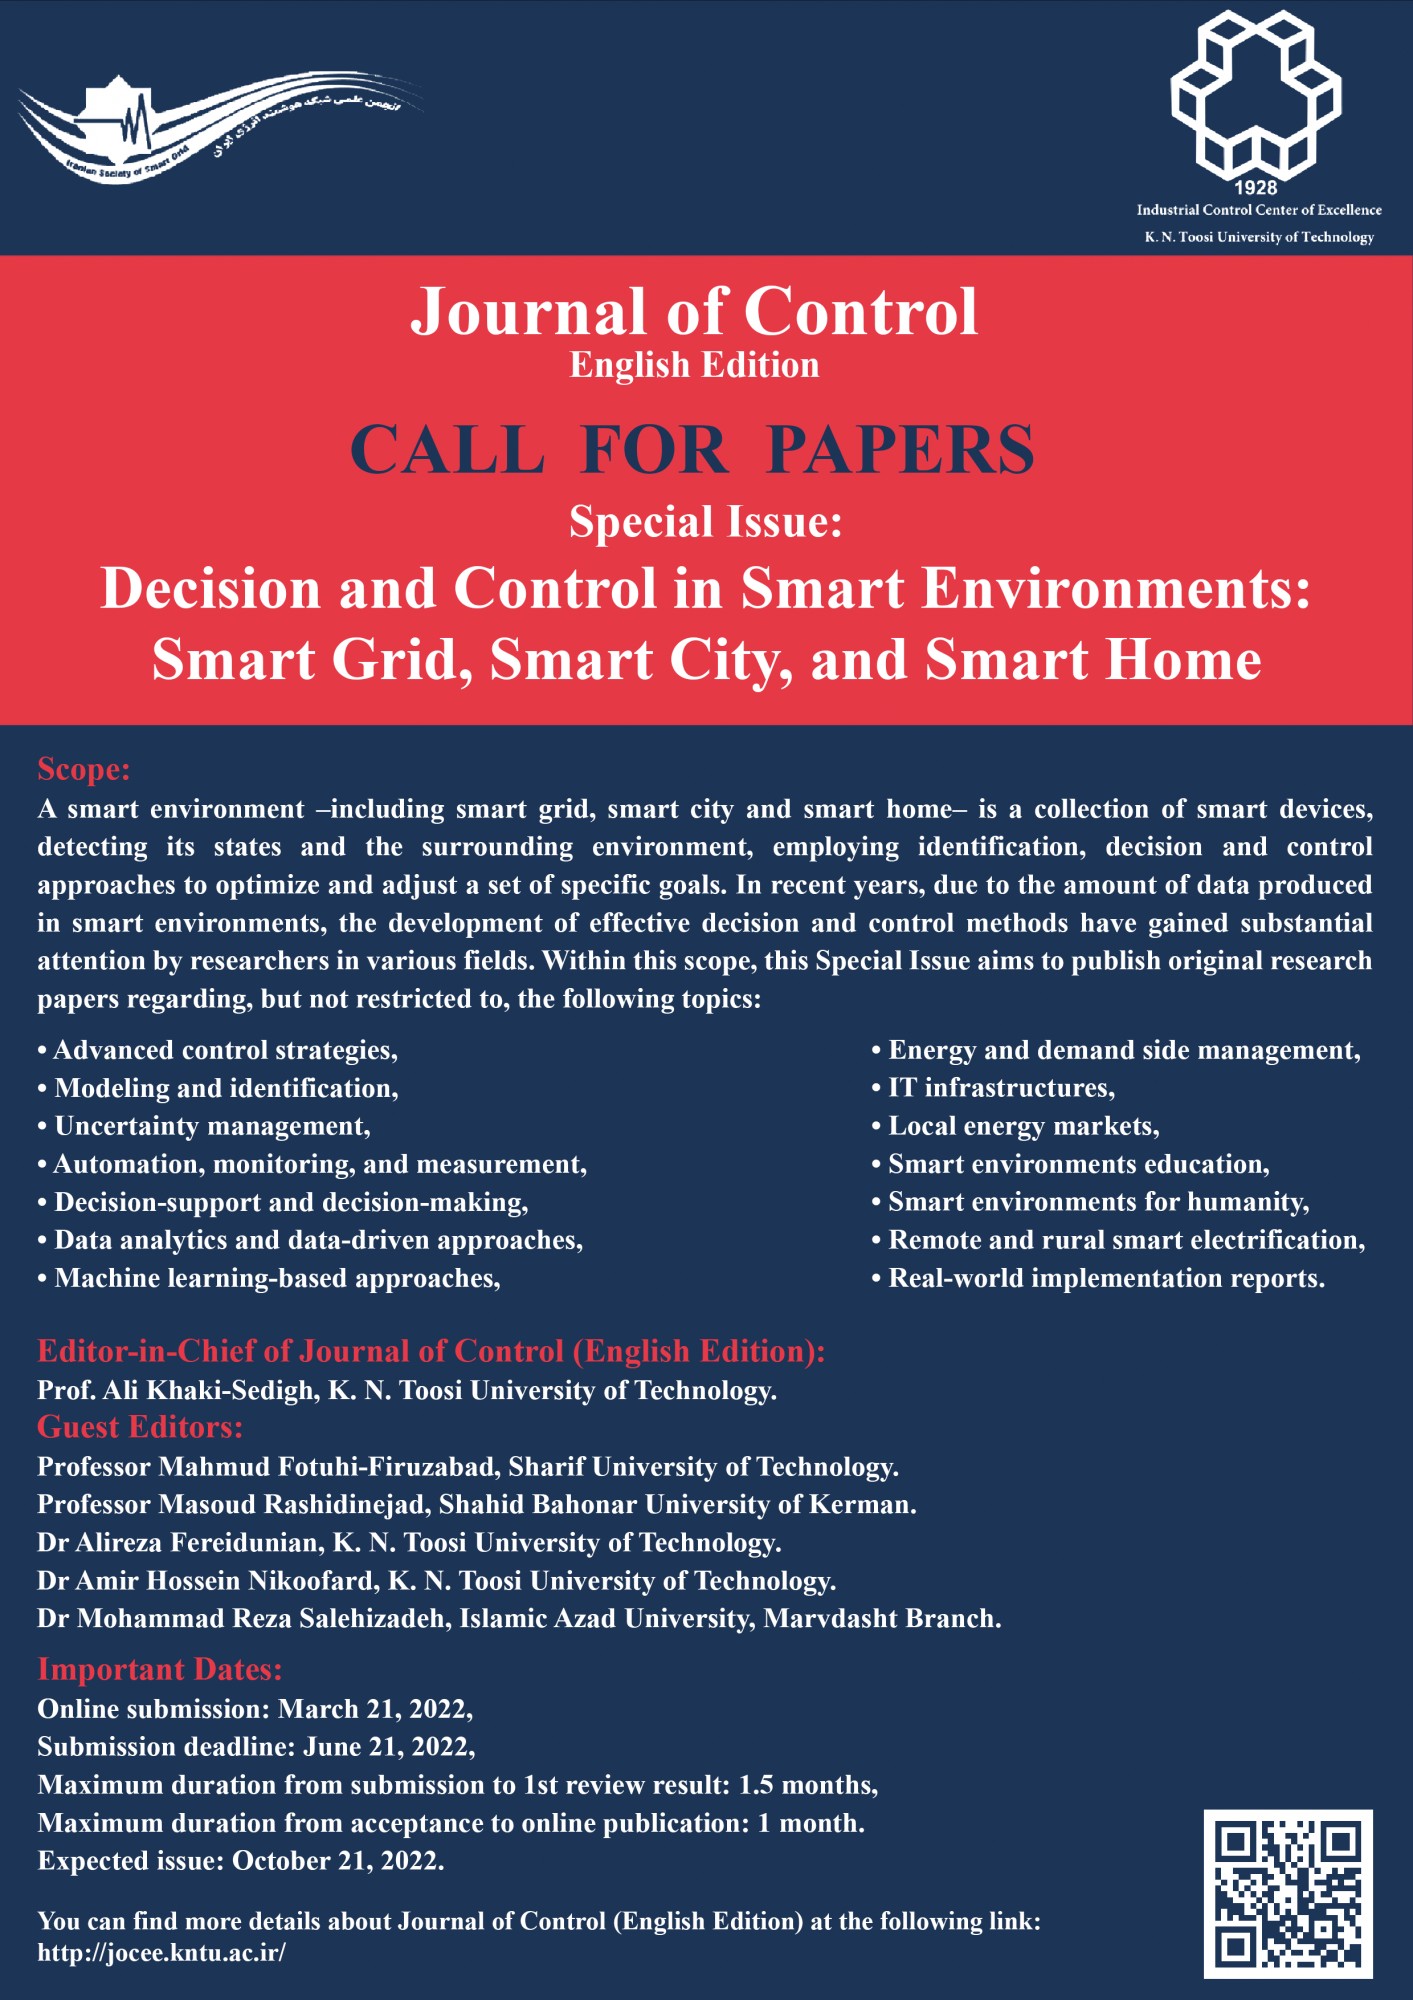 Decision and Control in Smart Environments  (Smart Grid, Smart City, and Smart Home)